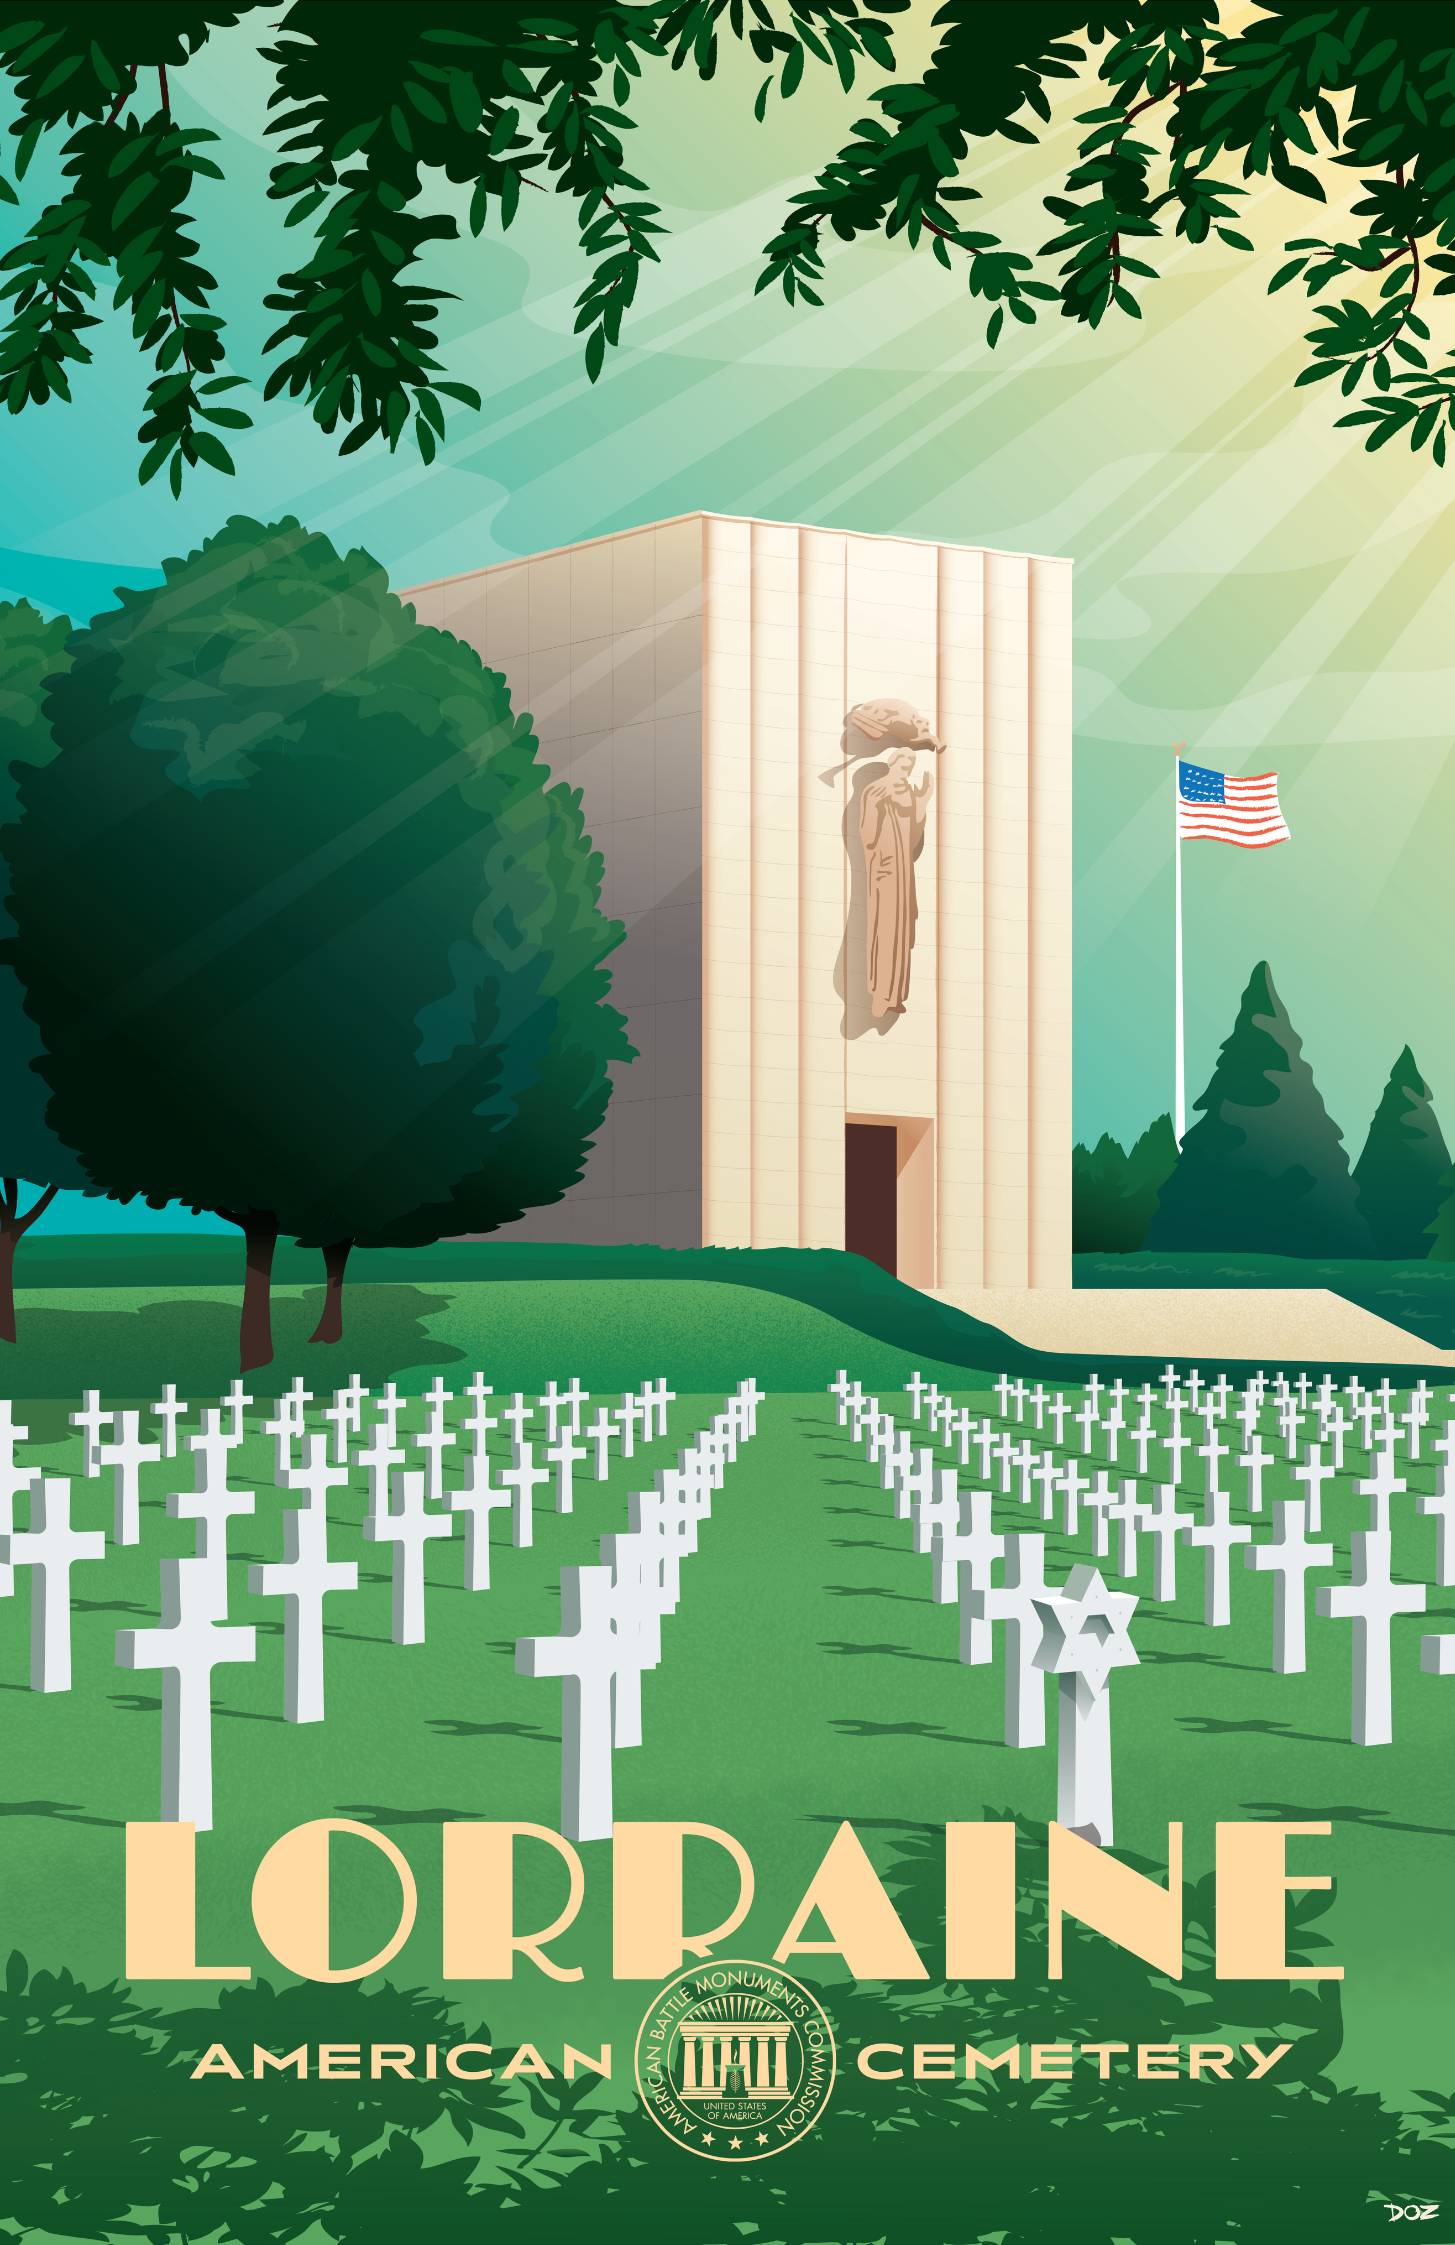 Vintage poster of Lorraine American Cemetery created to mark ABMC Centennial